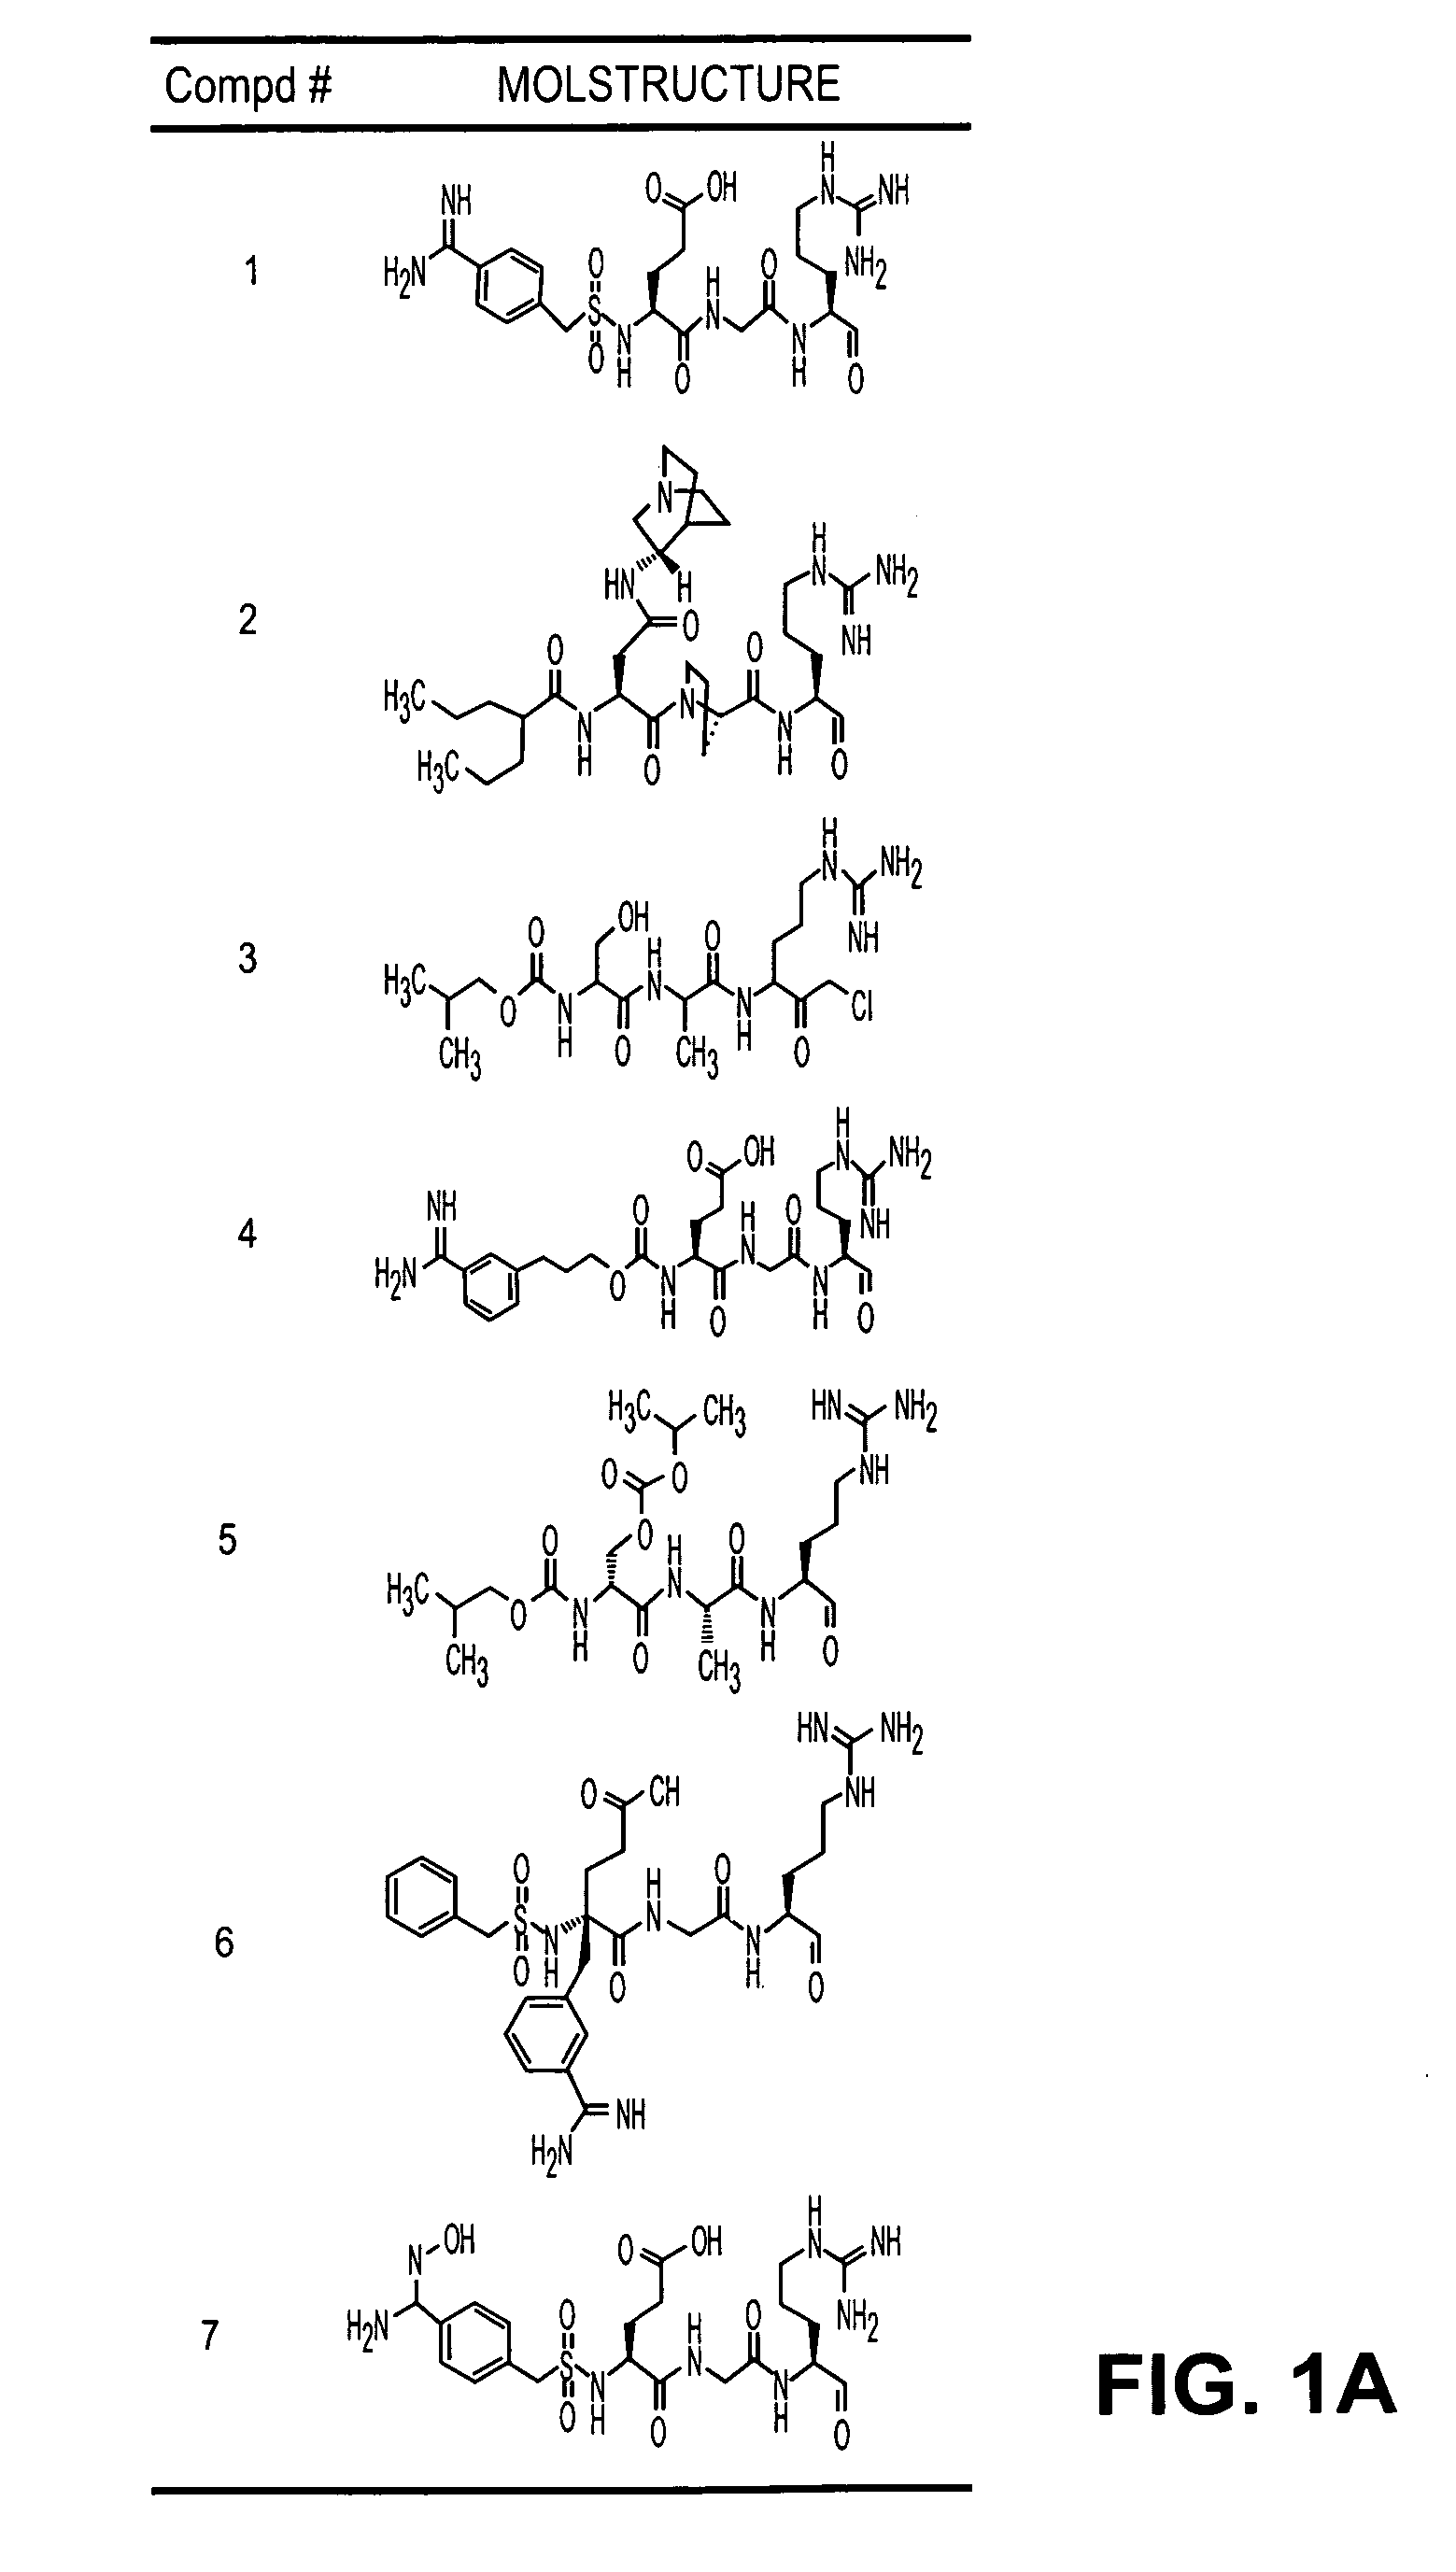 Inhibitors of serine protease activity of matriptase or MTSP1